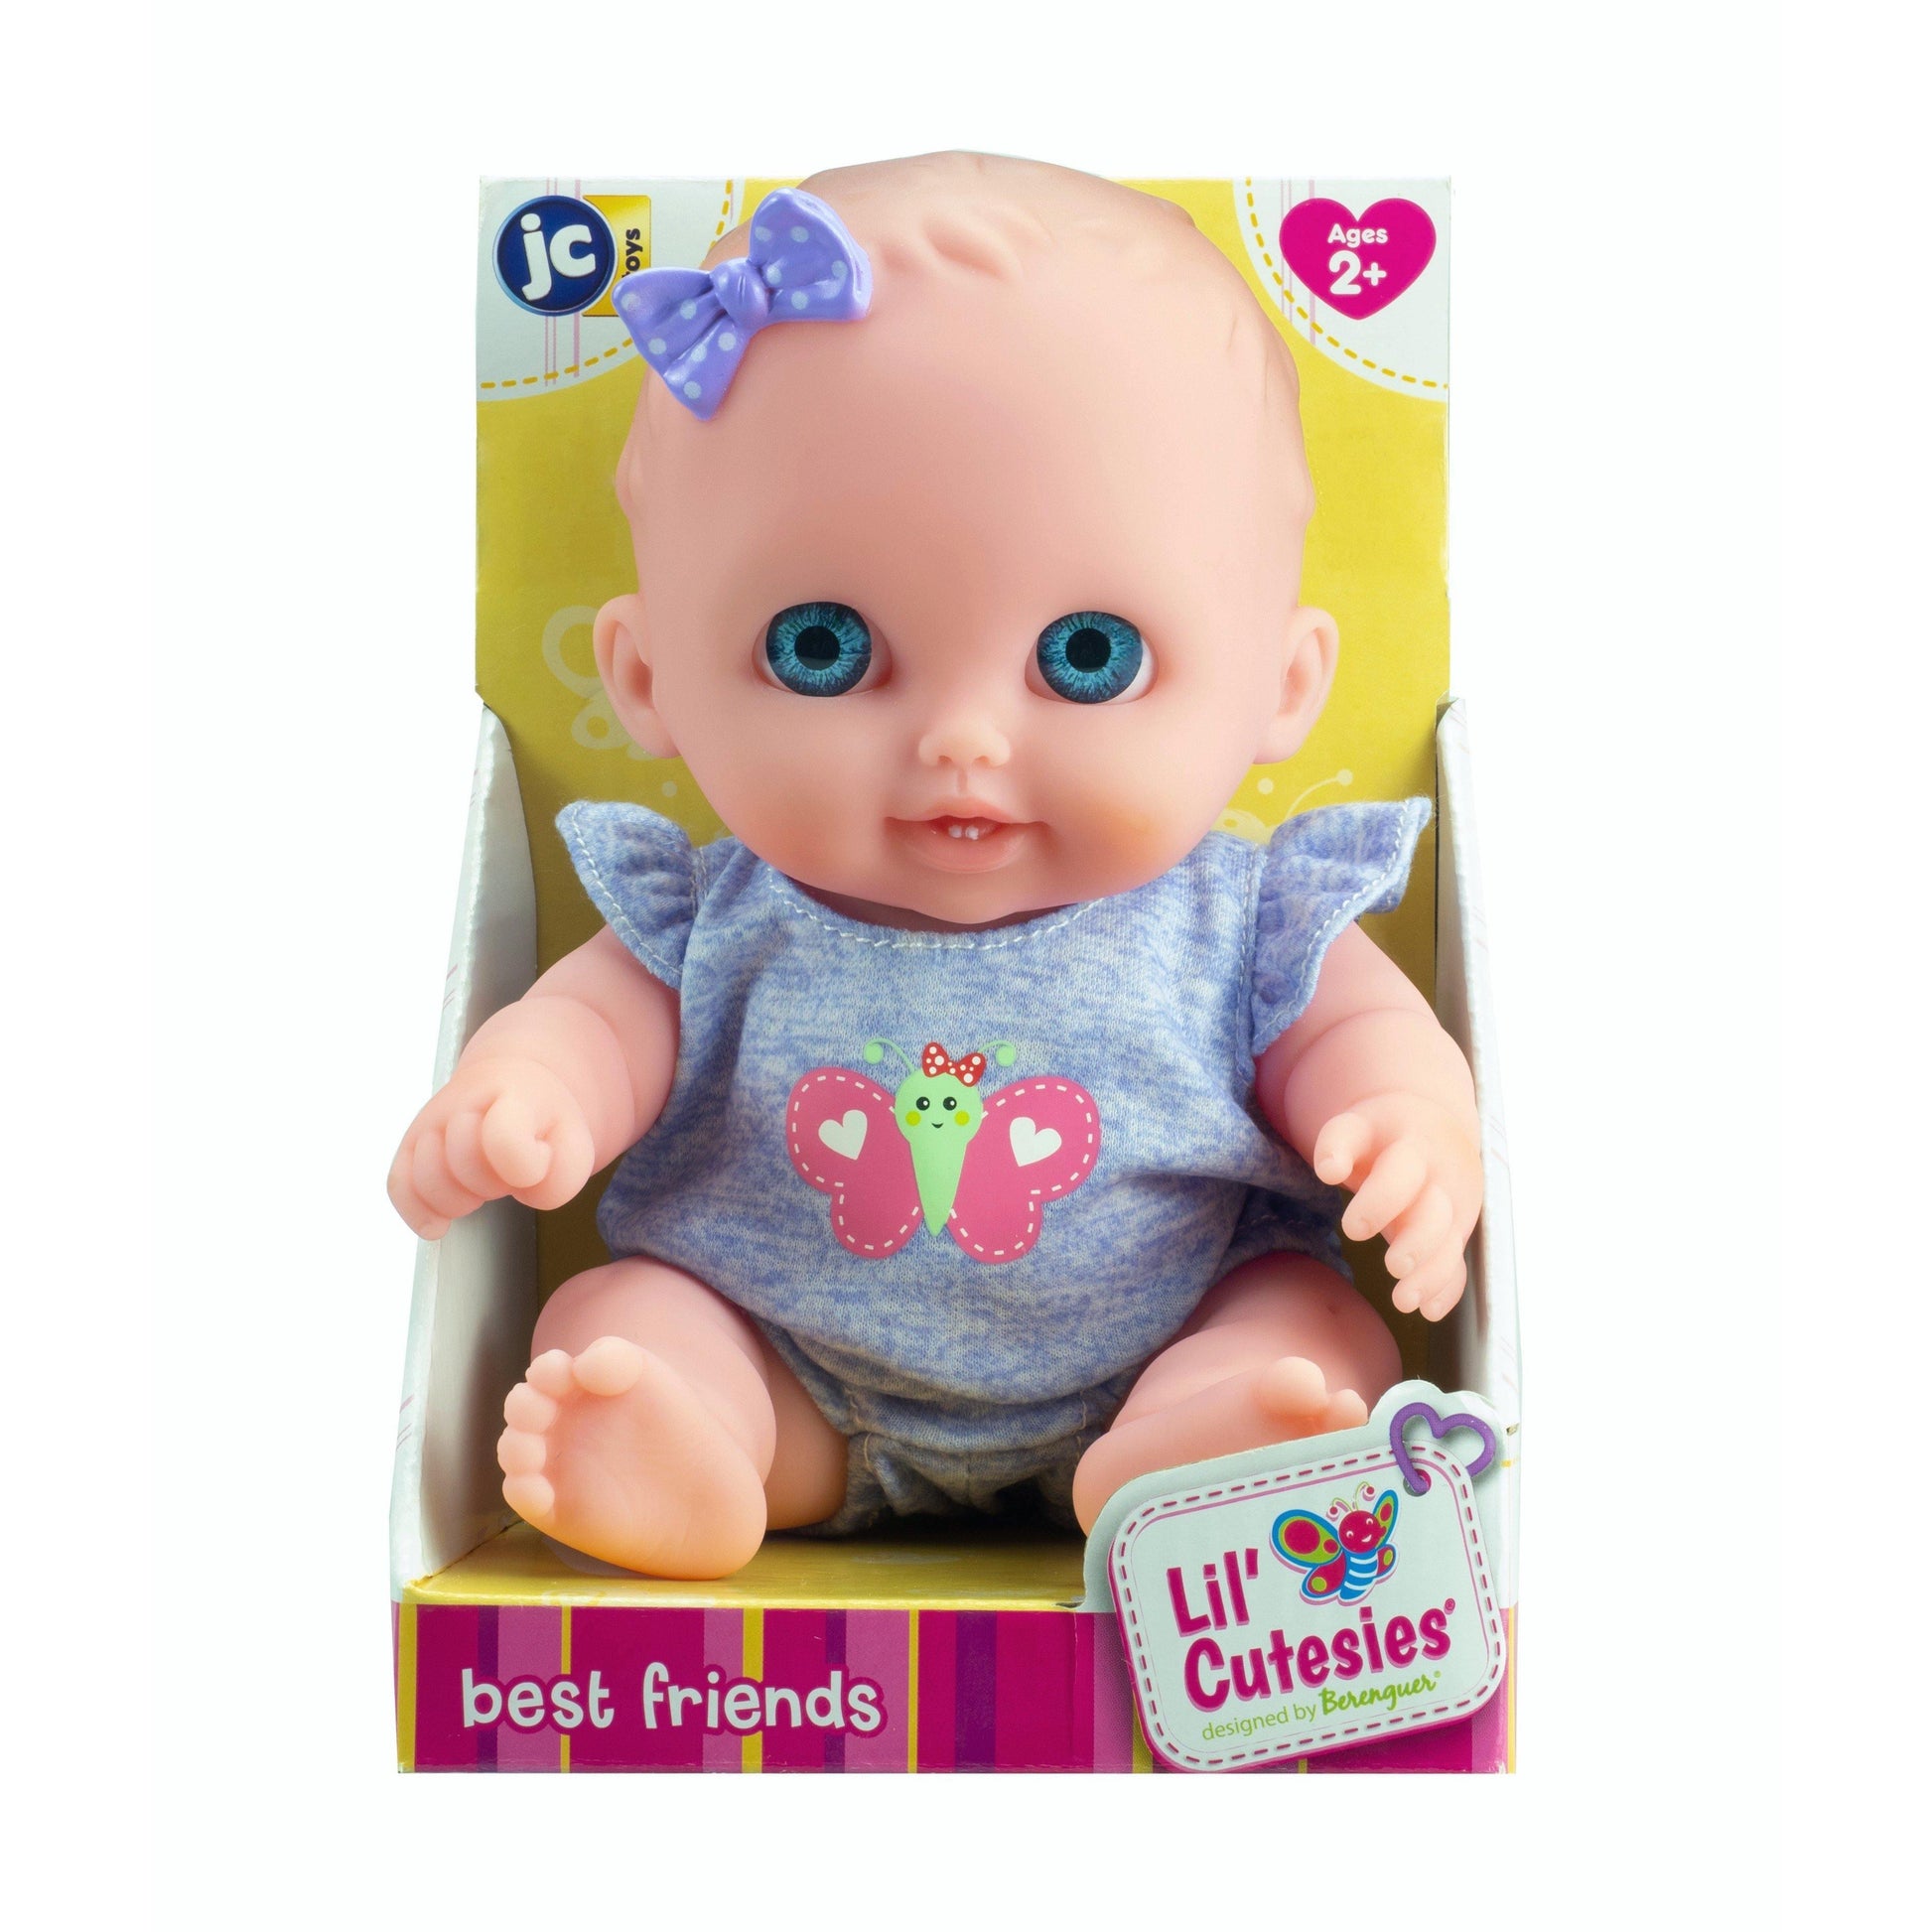 Lil Cutesies, Lulu 8.5" All Vinyl Baby Doll with Blue Eyes and Removable Outfit Ages 2+ - JC Toys Group Inc.